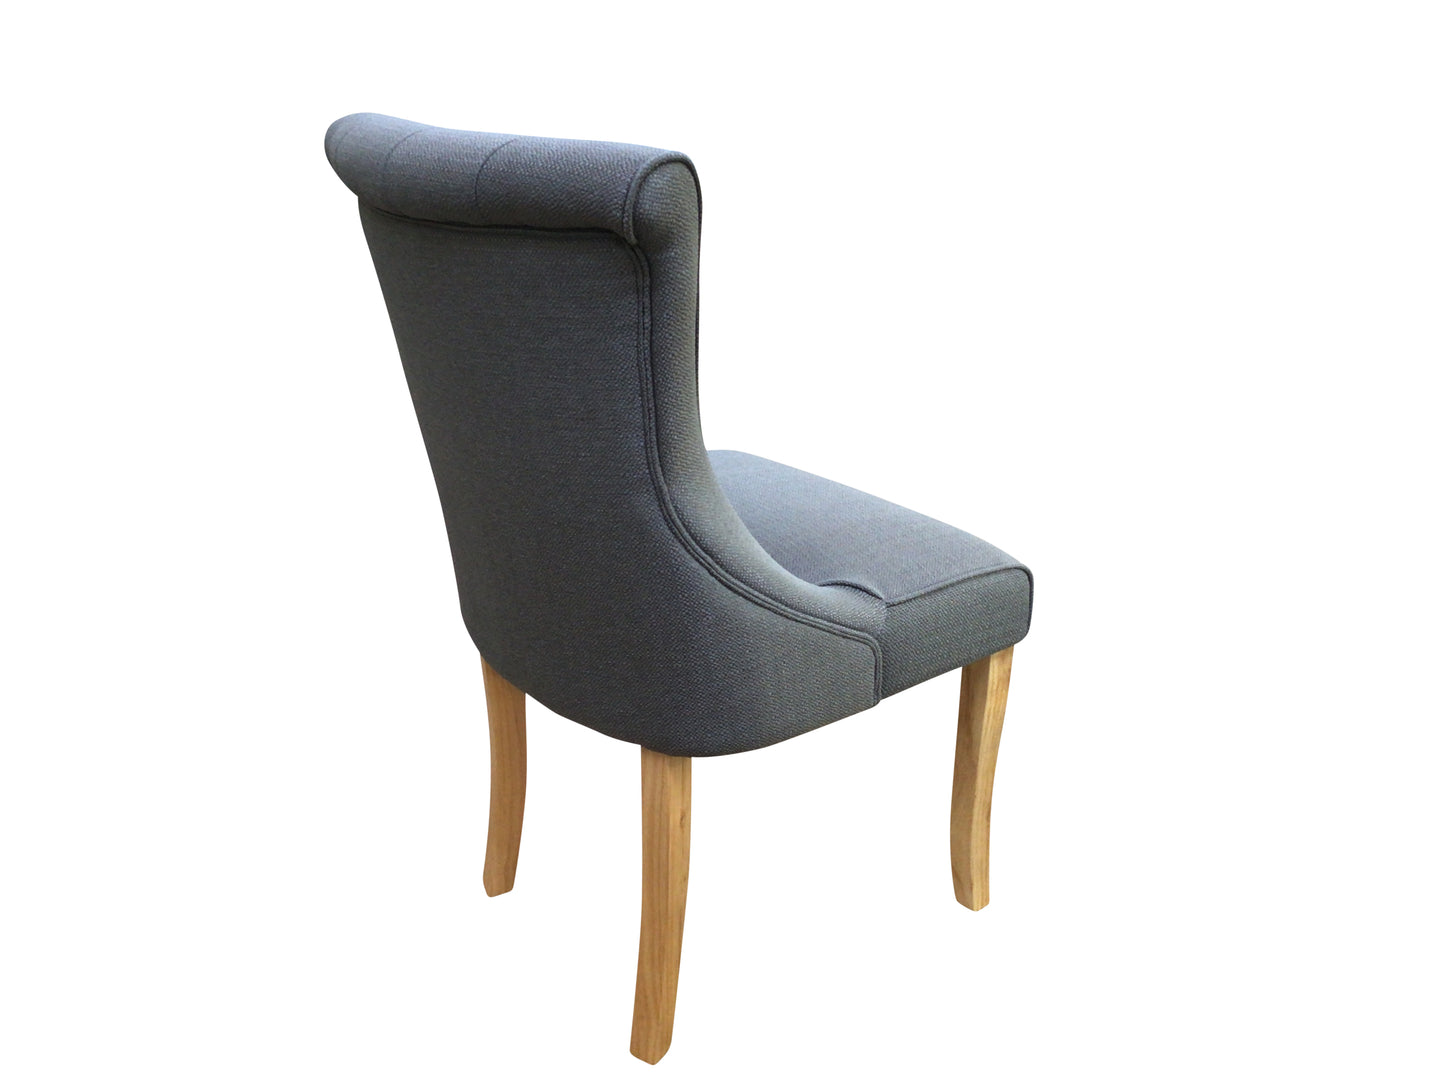 Kingston Cement Grey Linen Dining Chair